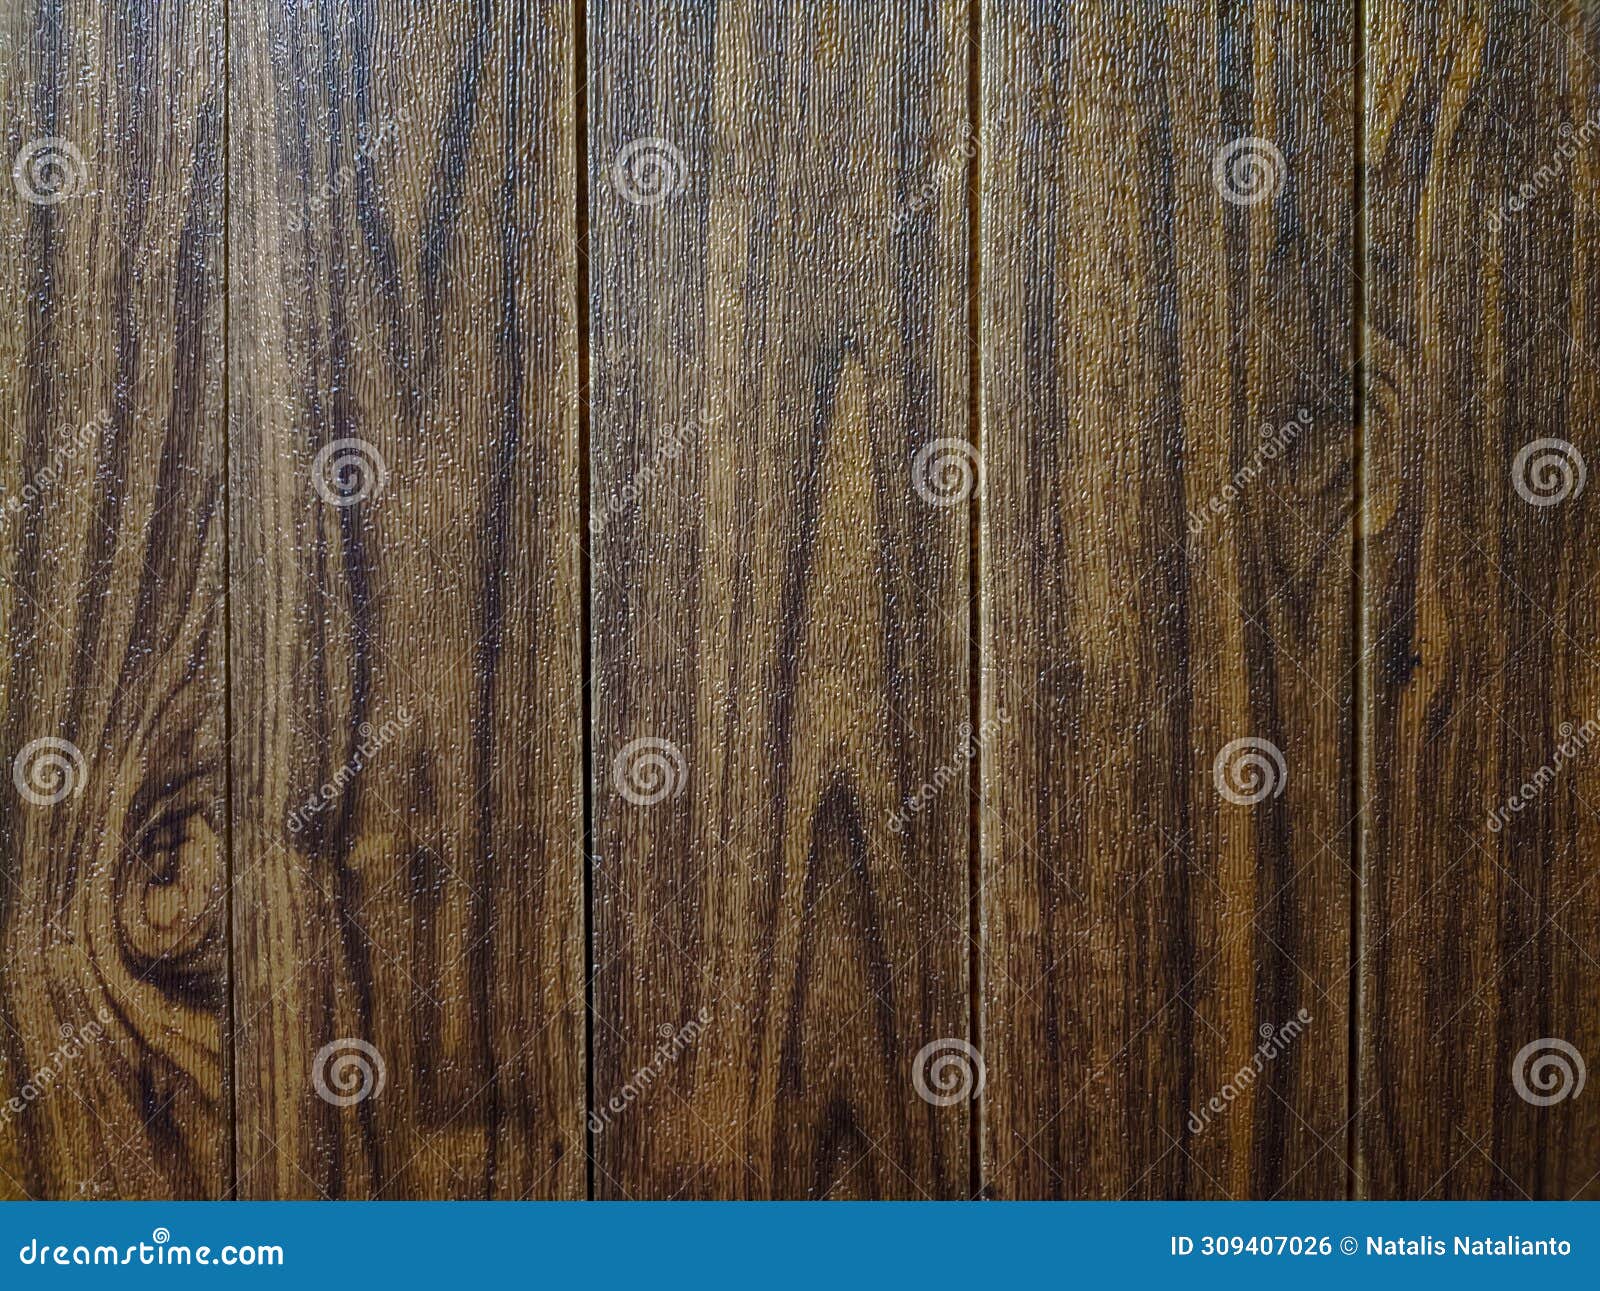 a wooden table background shooted from above...